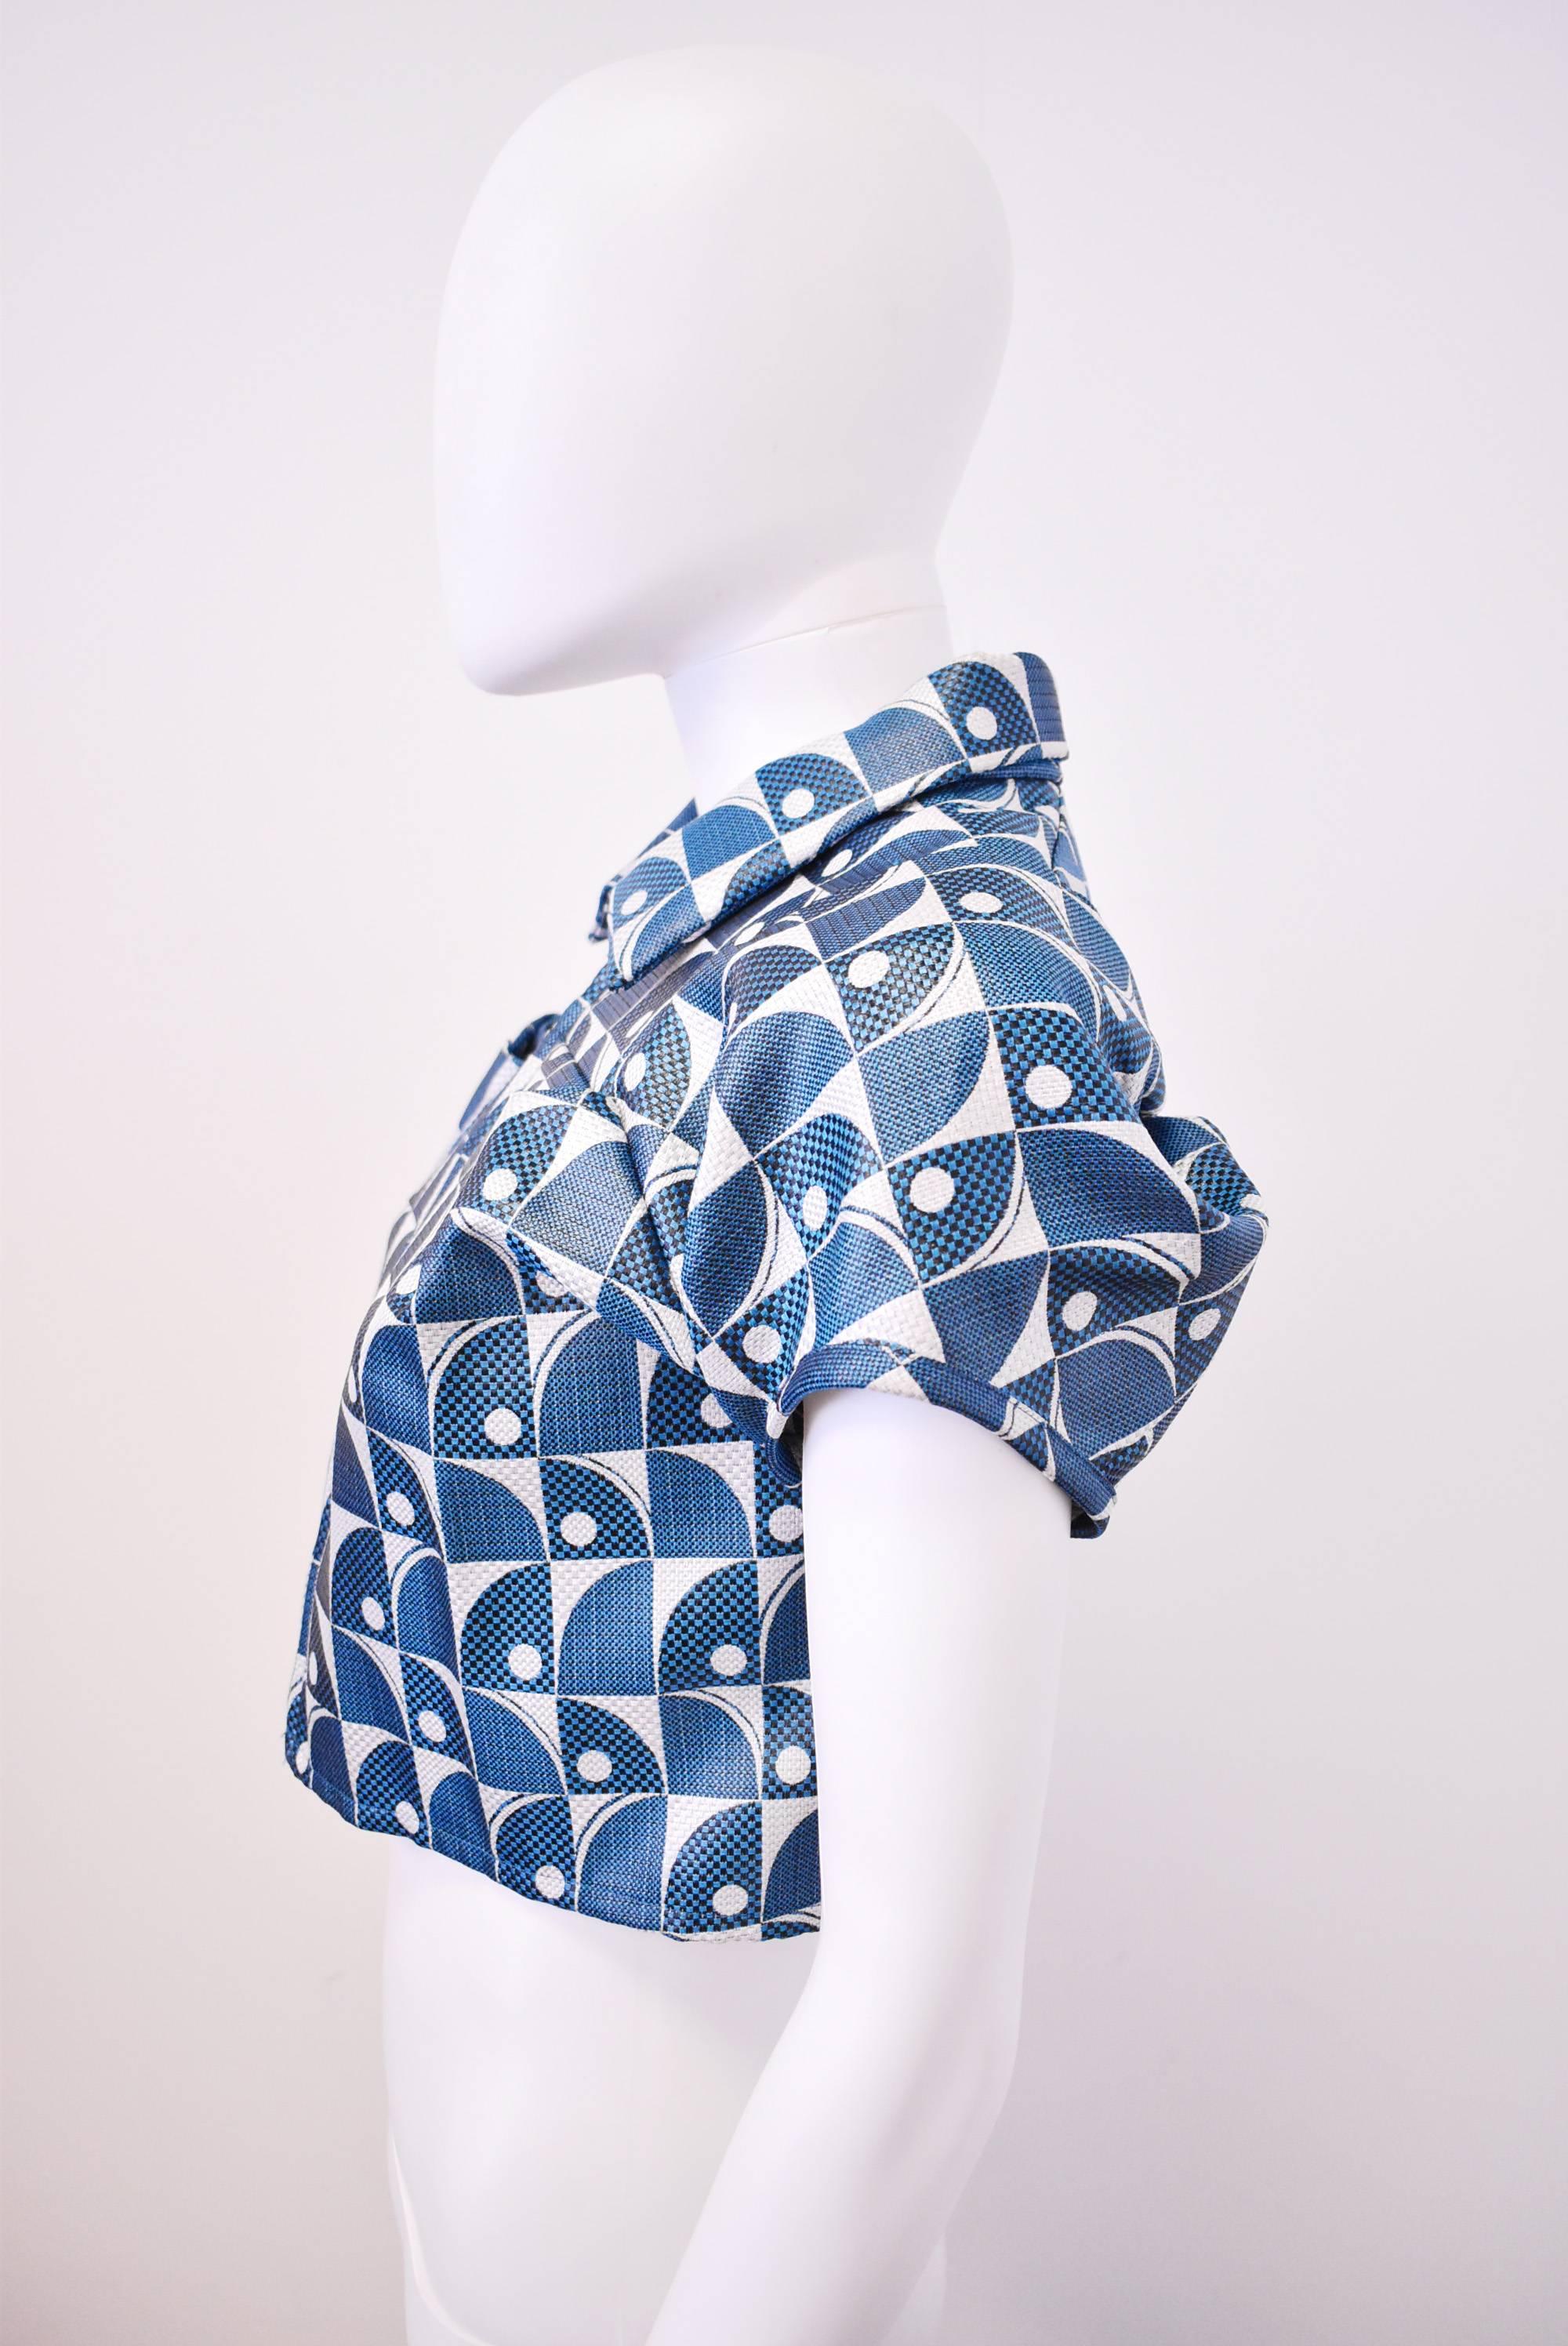 Junya Watanabe Blue and White Jacquard Geometric Print Structured Top 1995 In Excellent Condition For Sale In London, GB